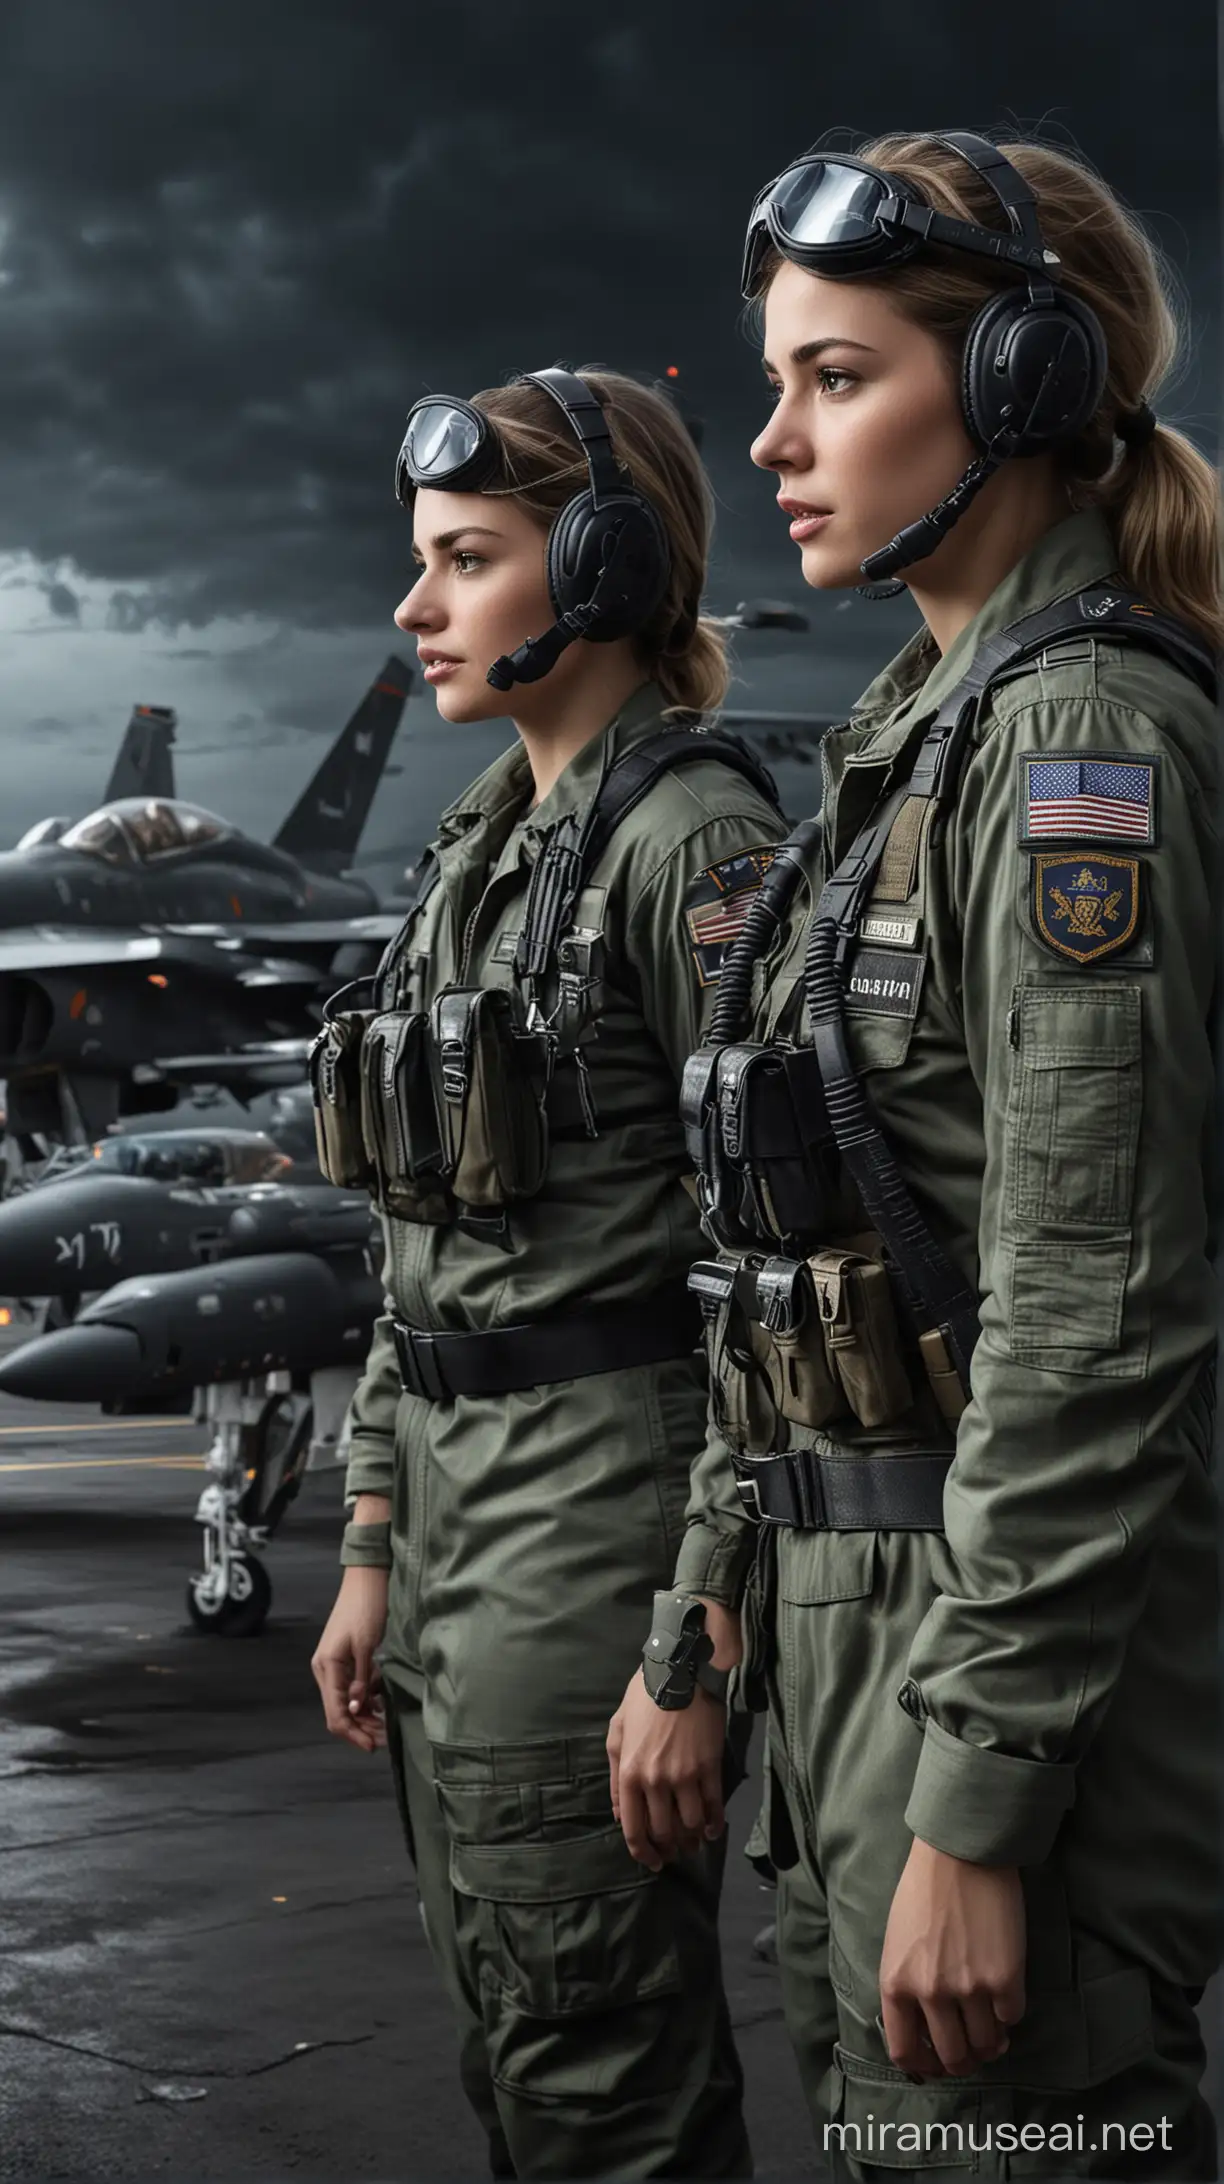 Hyper Realistic Illustration of Female Pilots Training for Nocturnal Bombing Missions